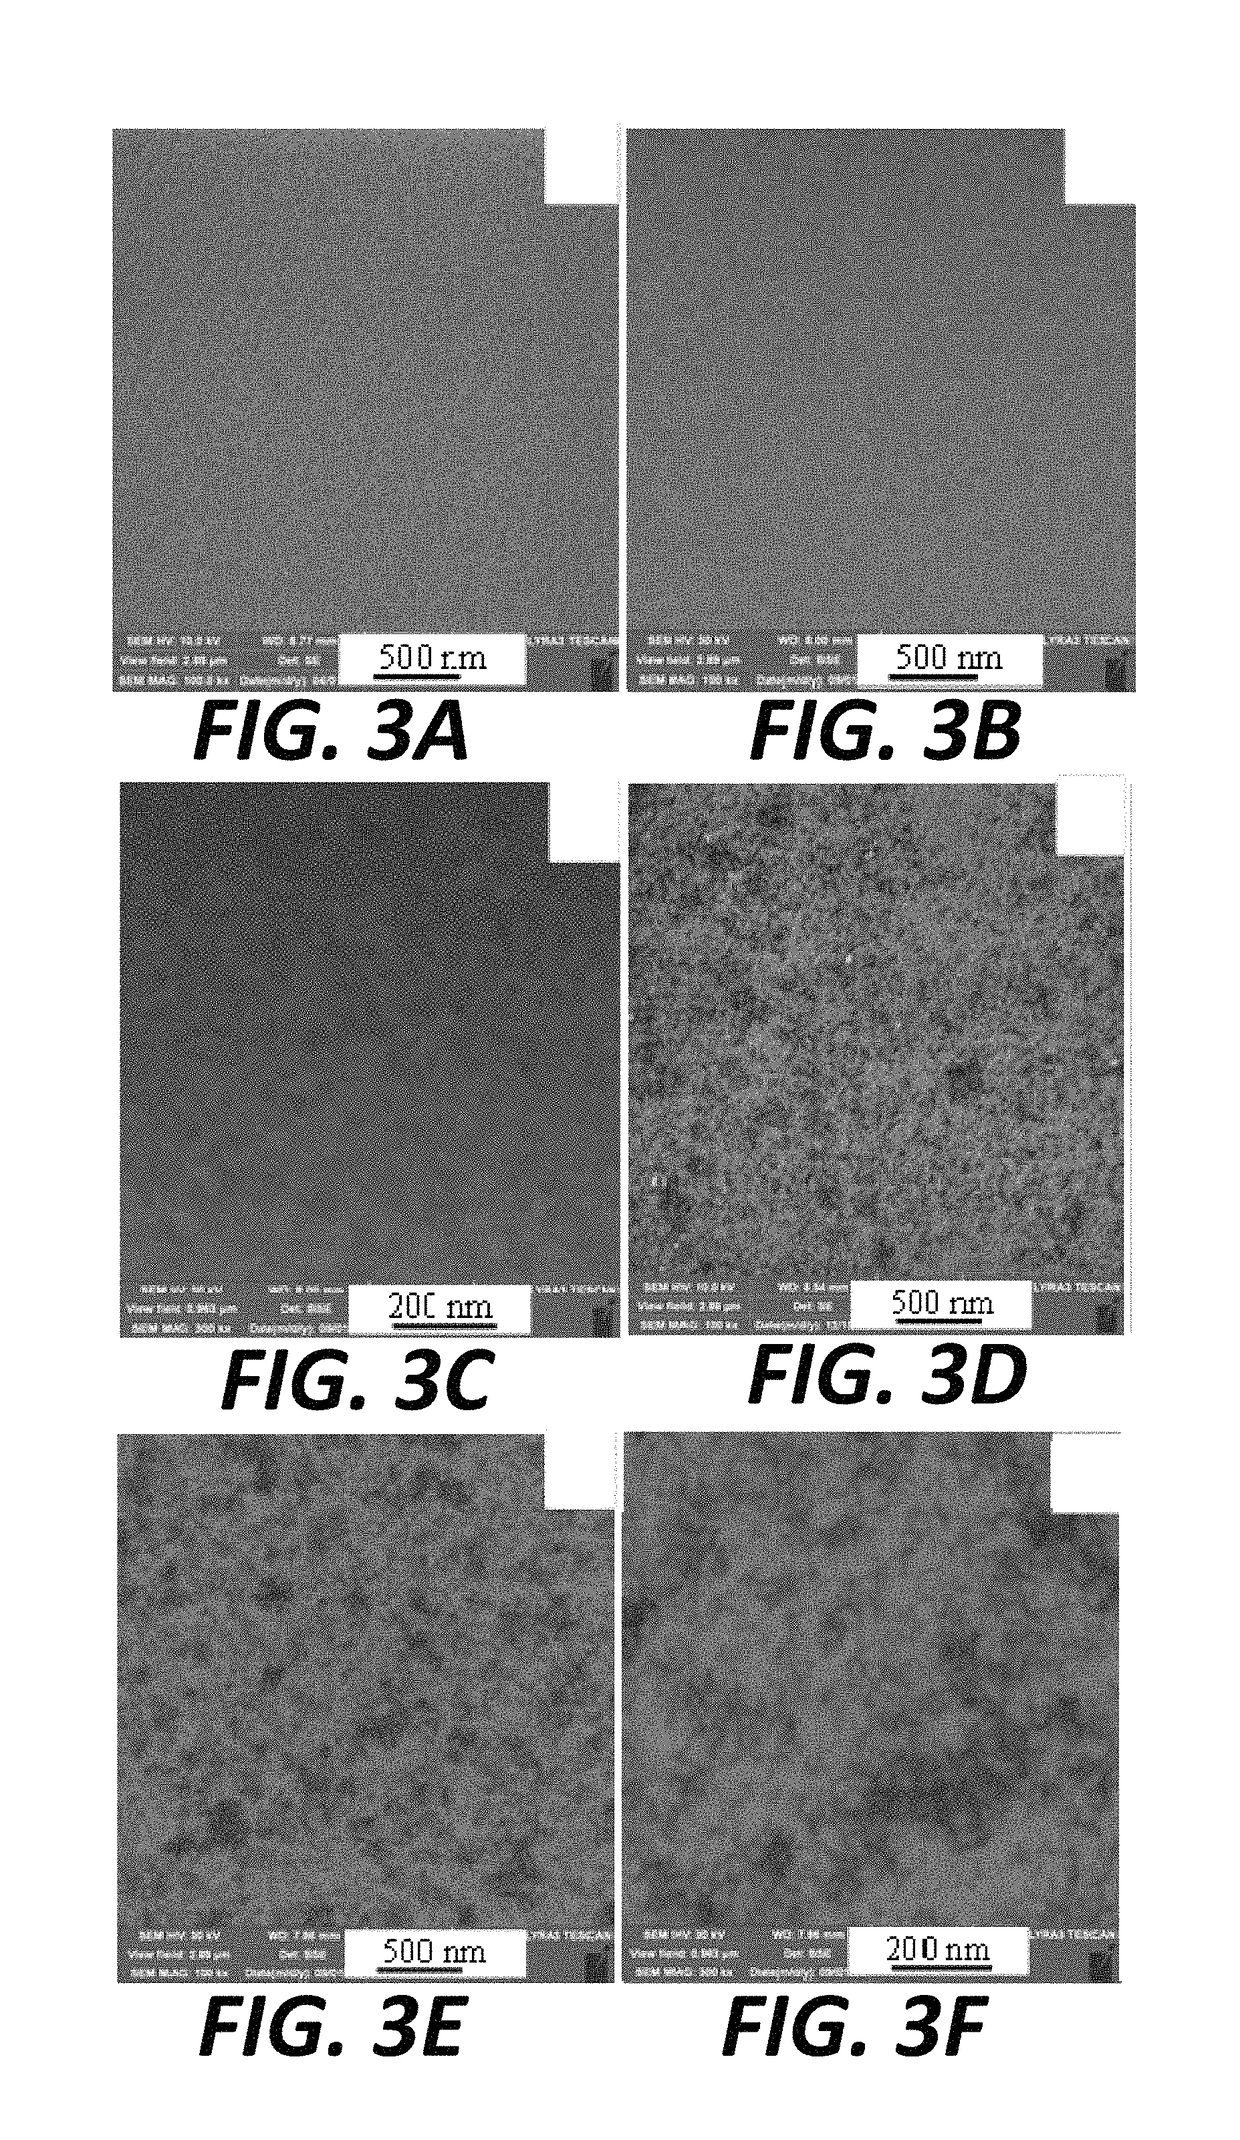 Method for preparing a gallium-doped zinc oxide electrode decorated with densely gathered palladium nanoparticles